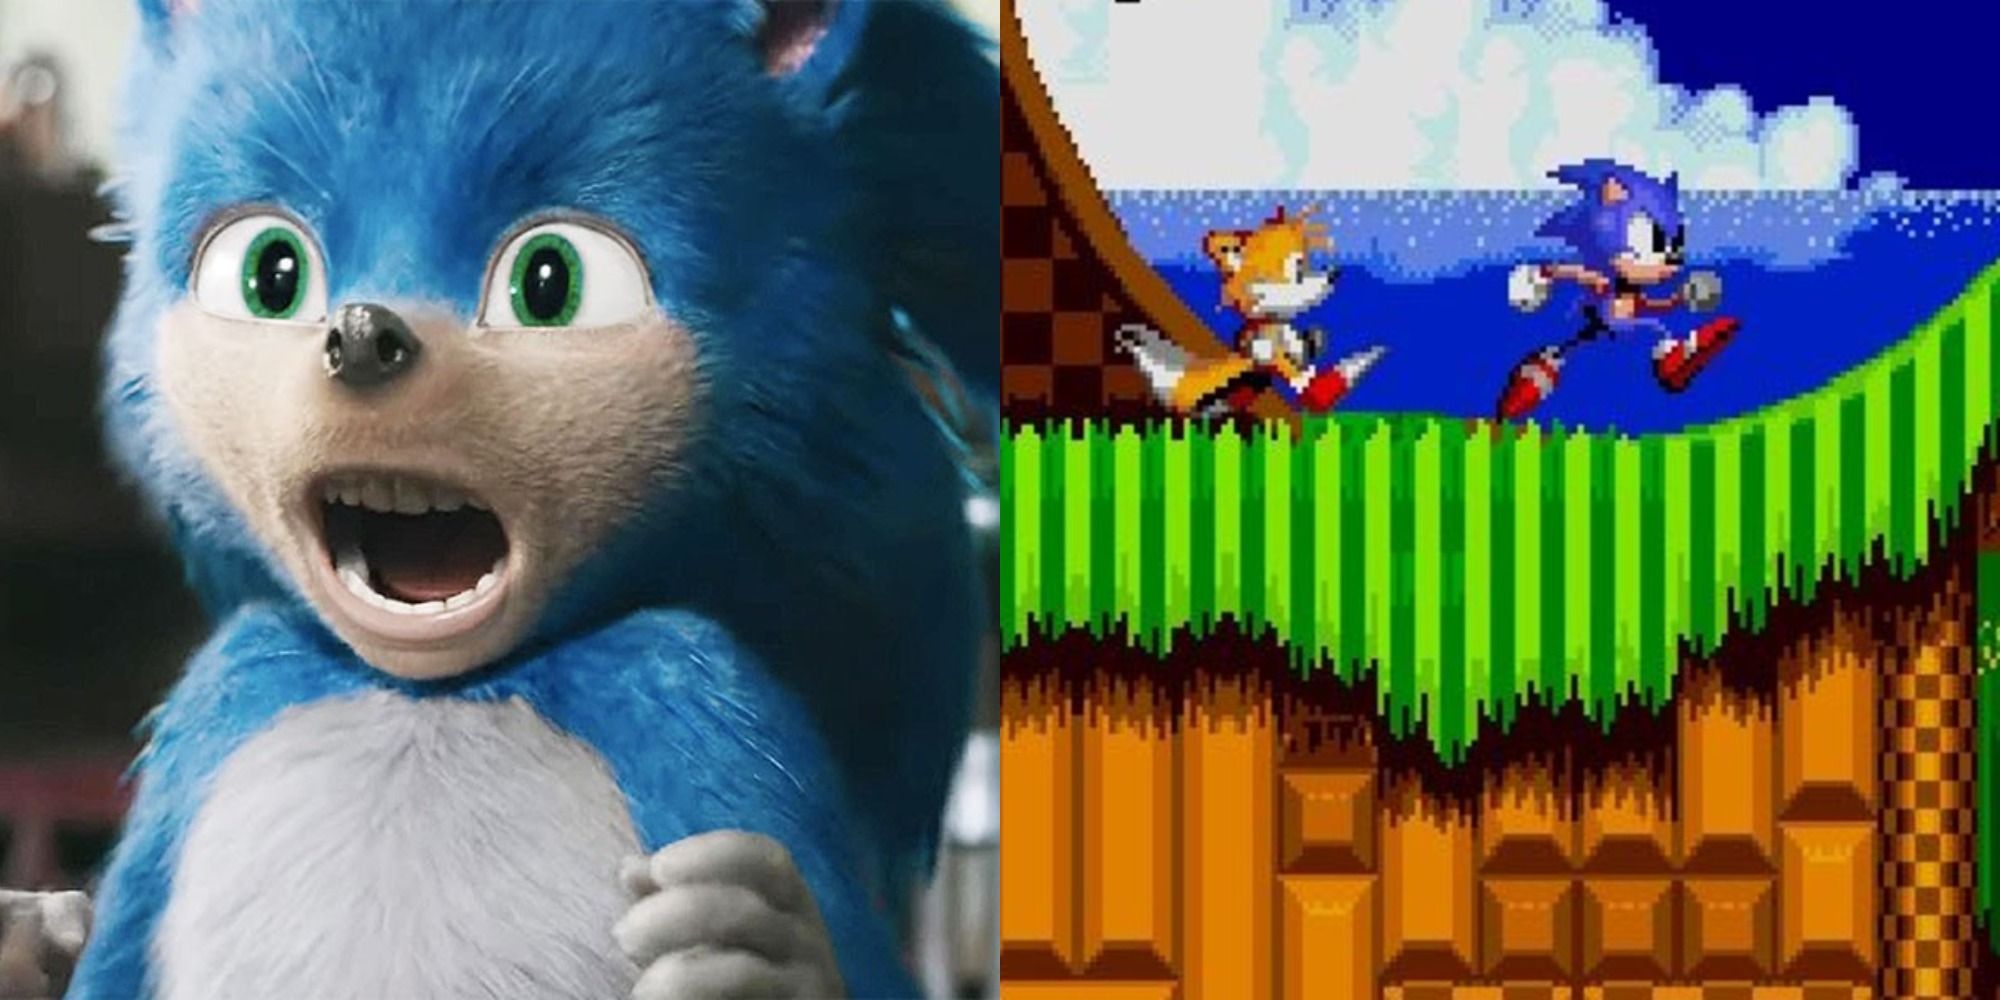 A split image of the old Sonic design and Sonic and Tails in the video game